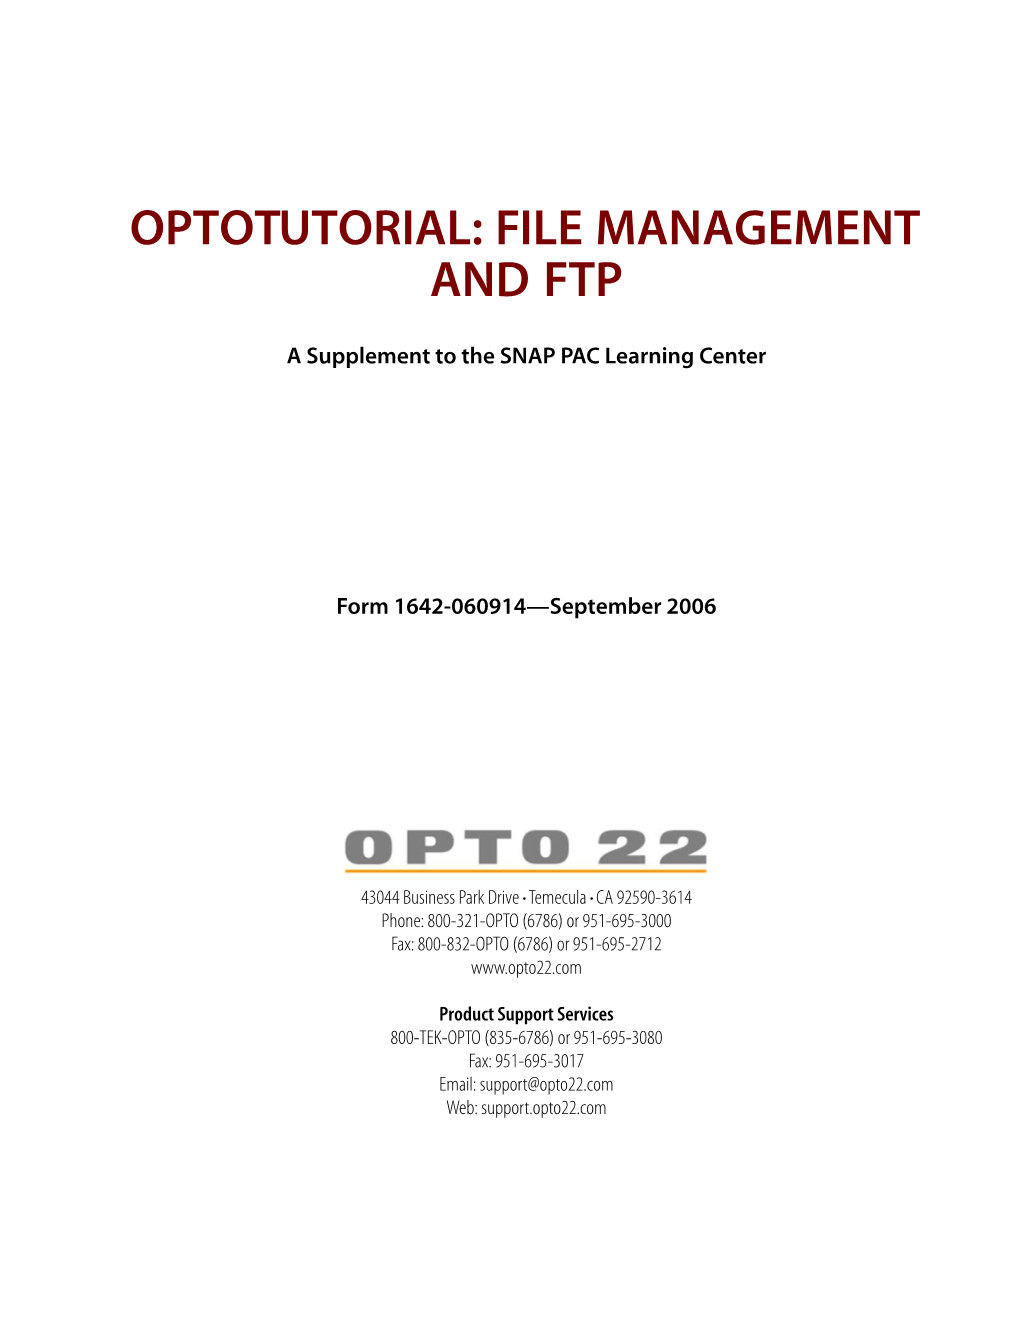 Optotutorial: File Management and Ftp